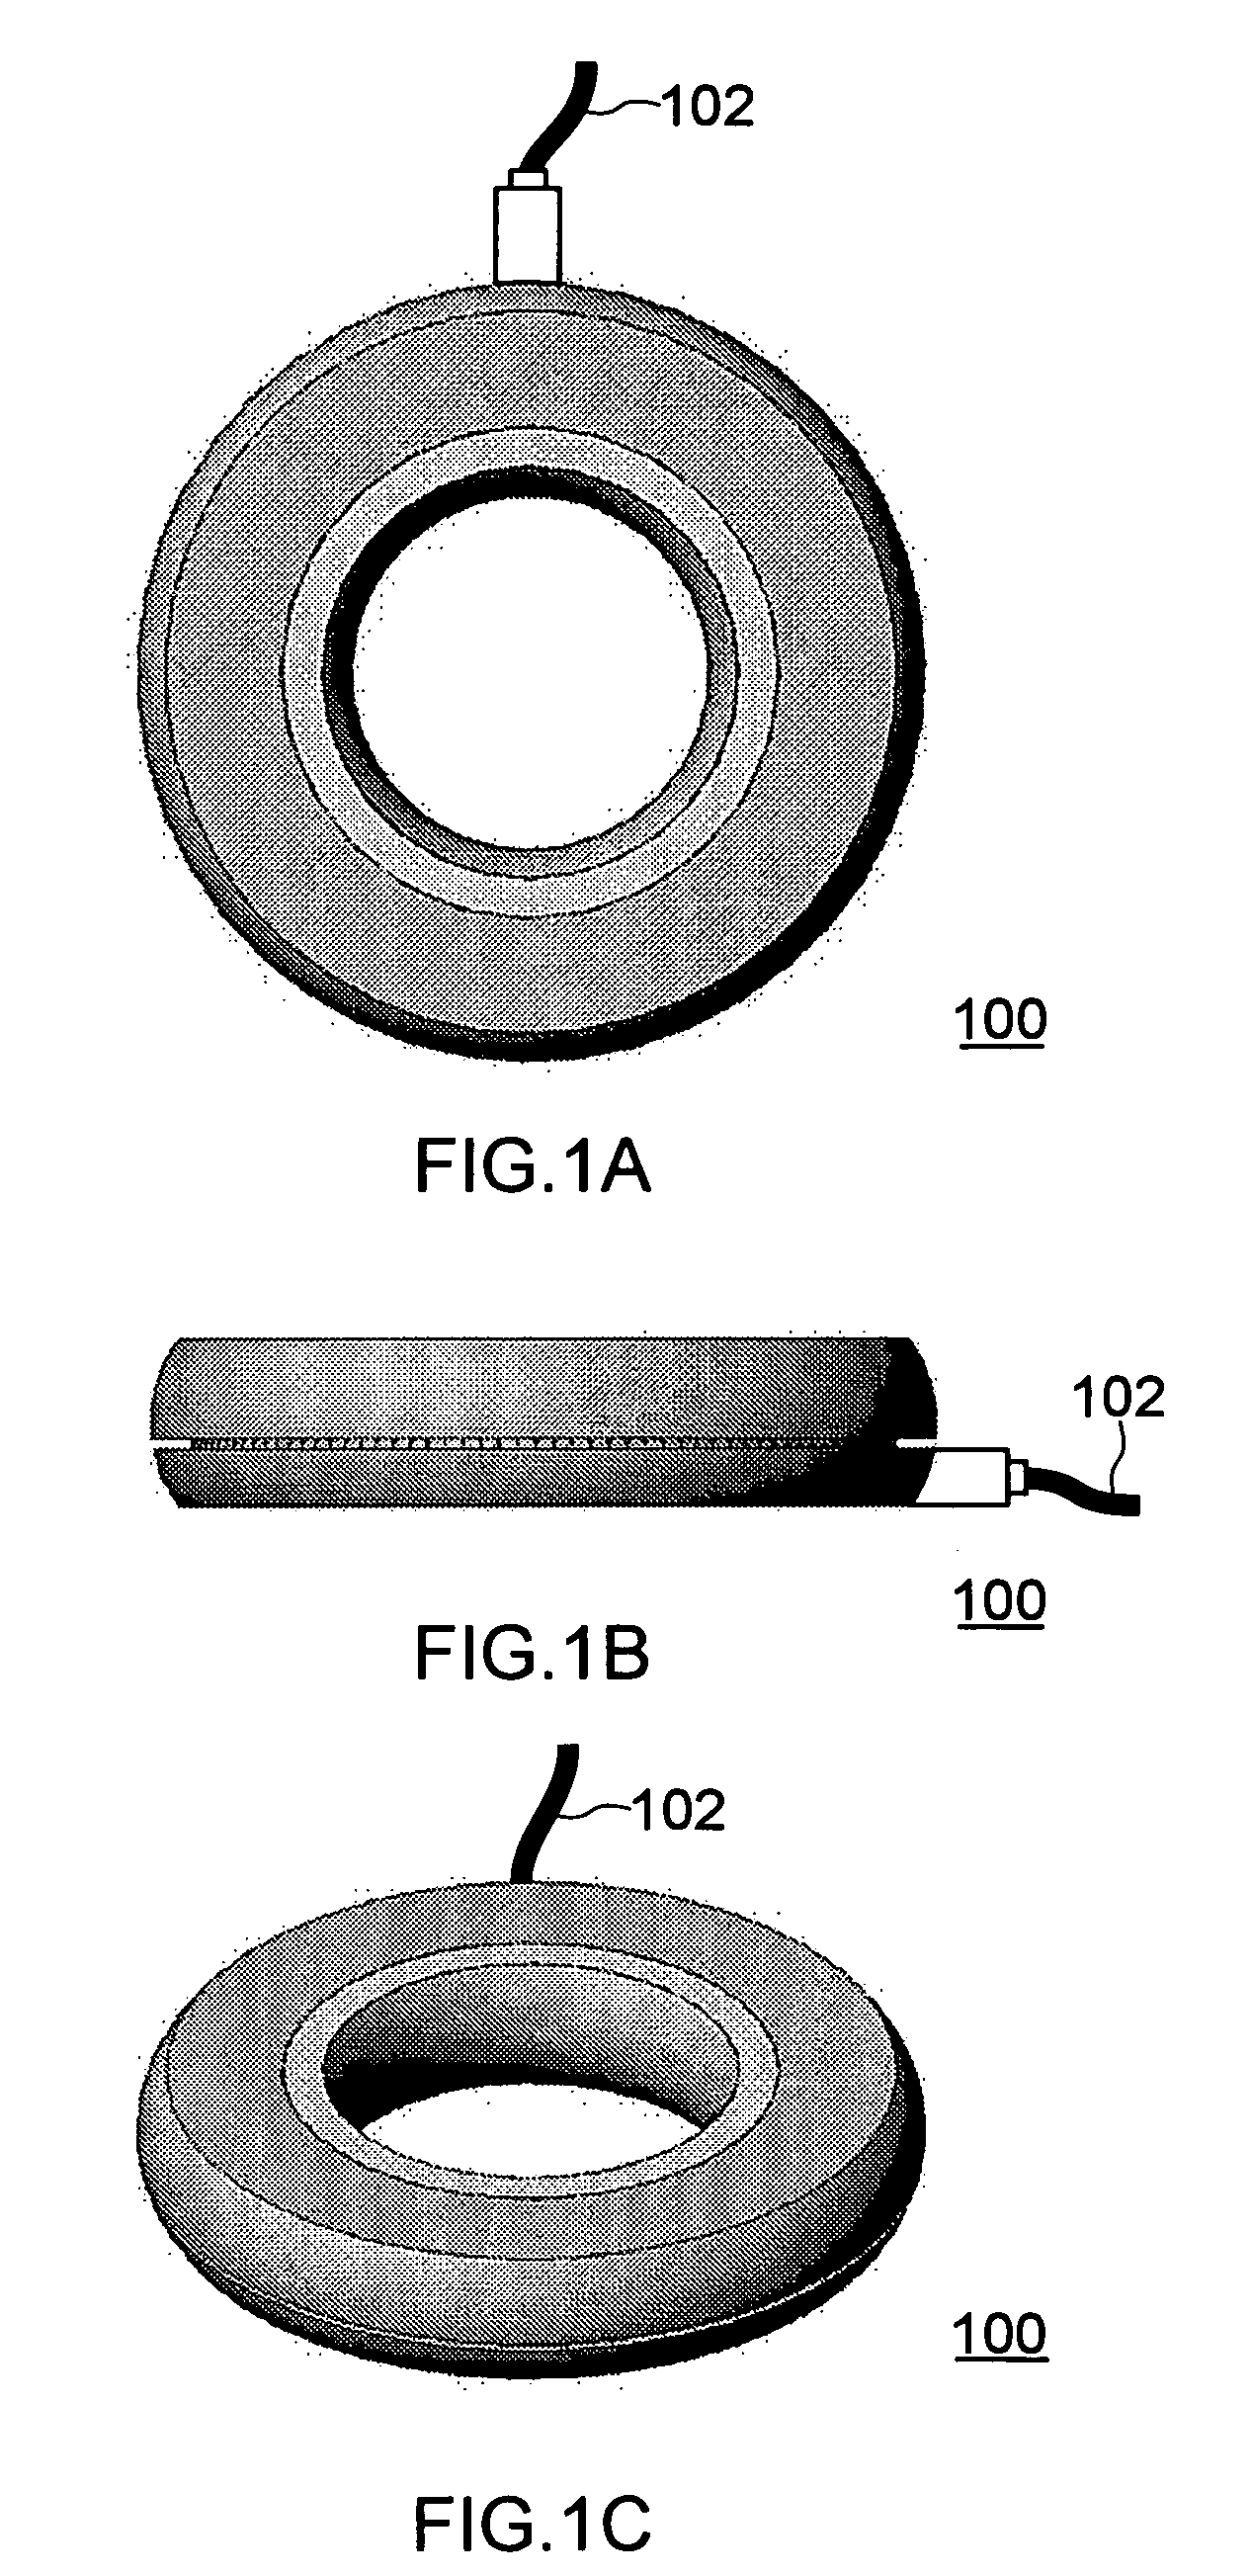 Haptic feedback controller, method of controlling the same, and method of transmitting messages that uses a haptic feedback controller